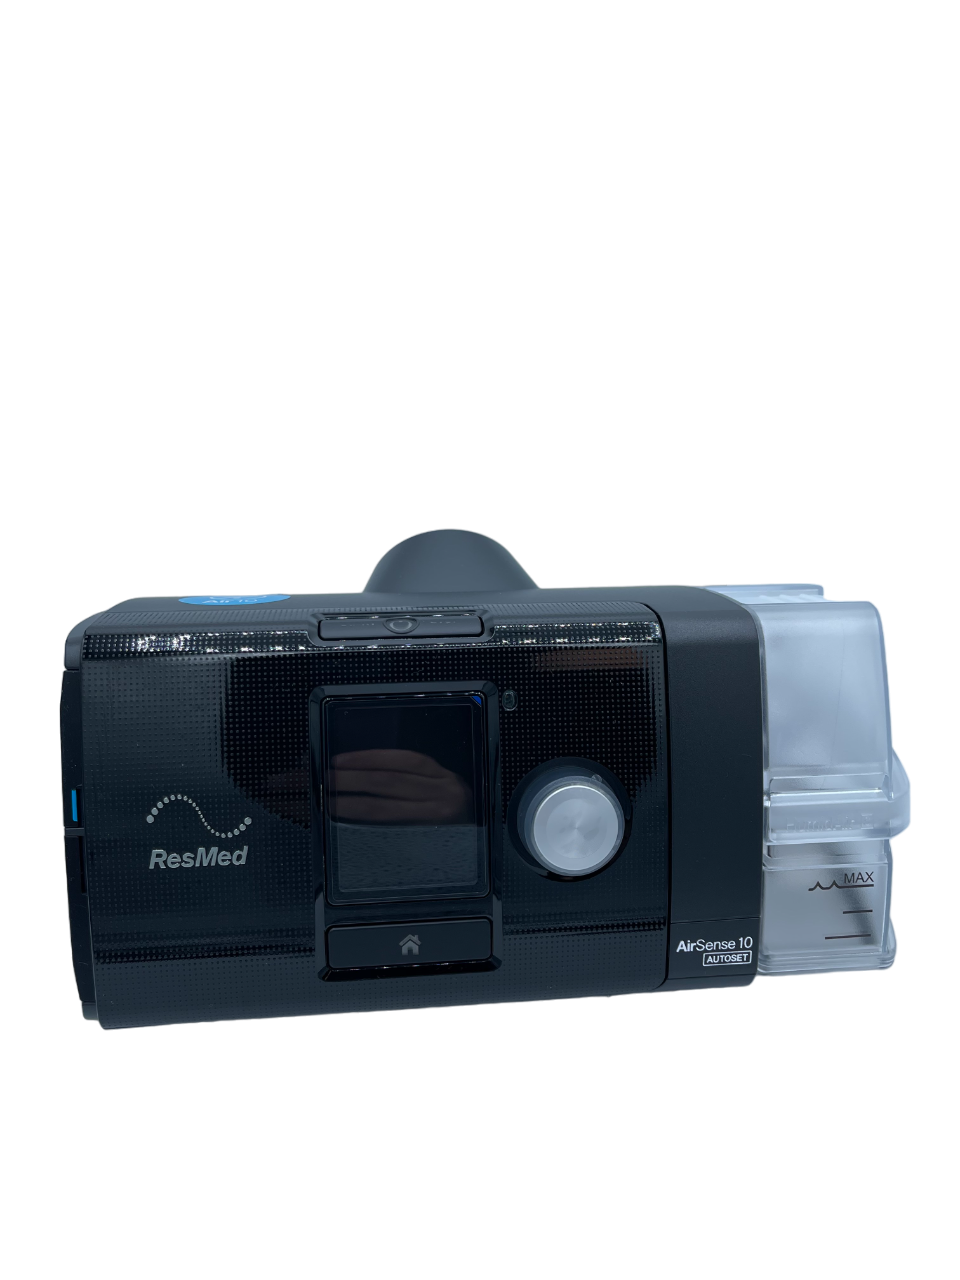 Resmed Airsense 10 Autoset CPAP Machine with Humidifier and ClimateLineAir Tube - Certified Pre-Owned